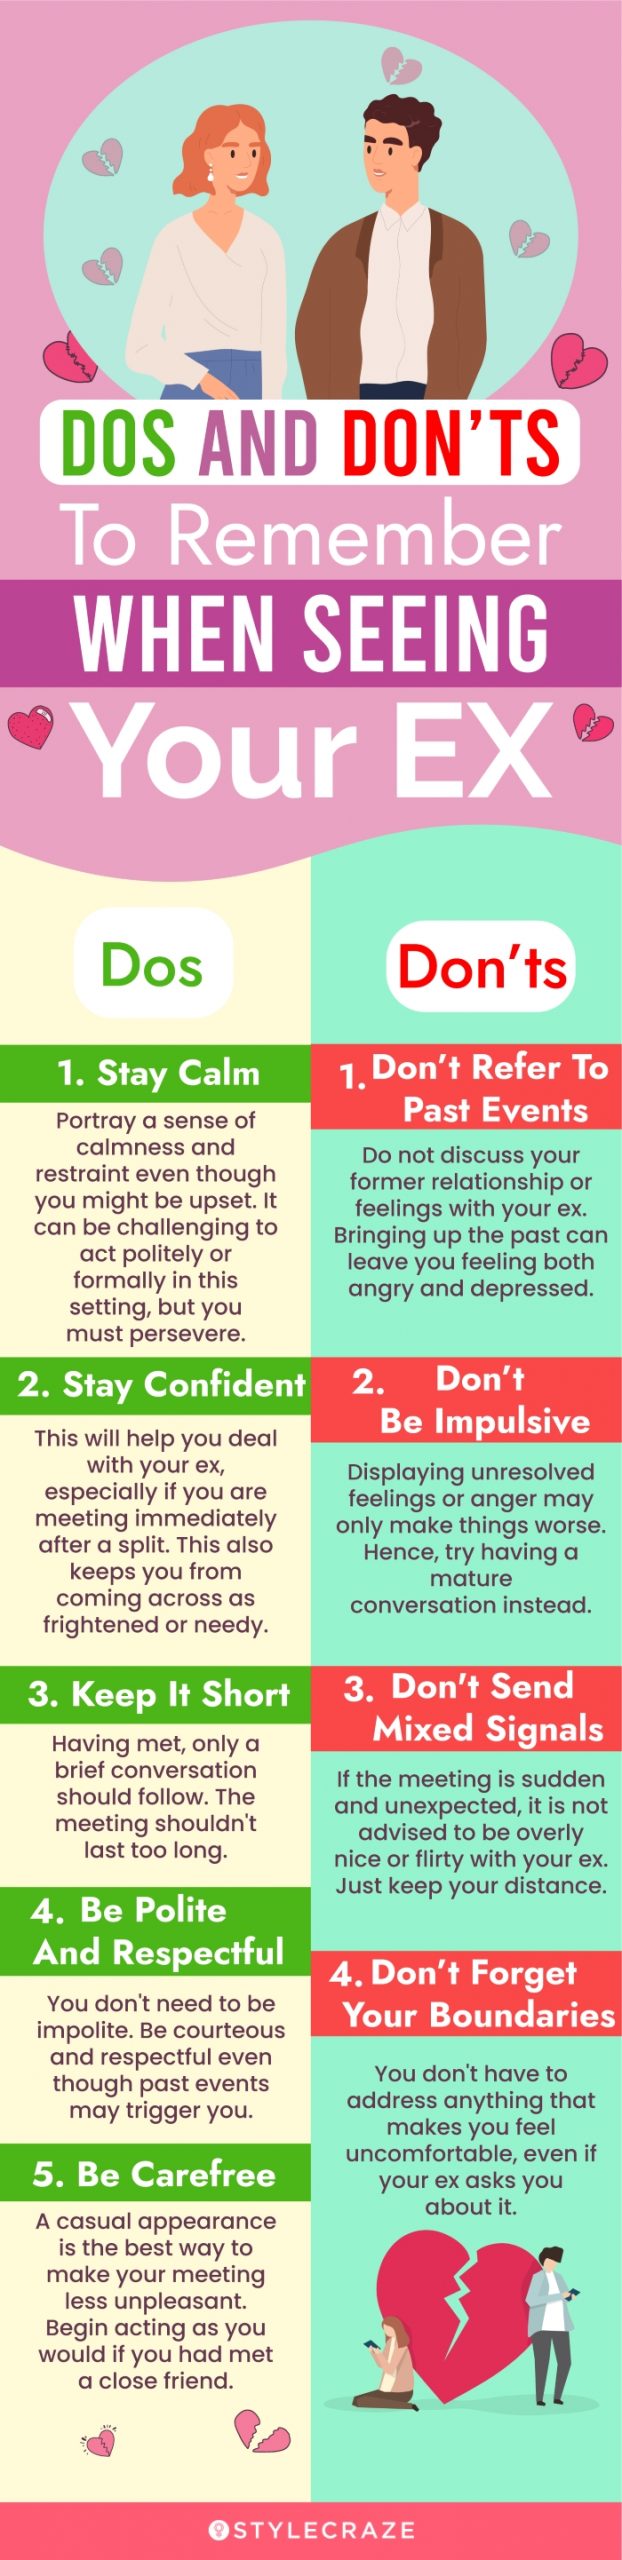 dos and don'ts to remember when seeing your ex (infographic)